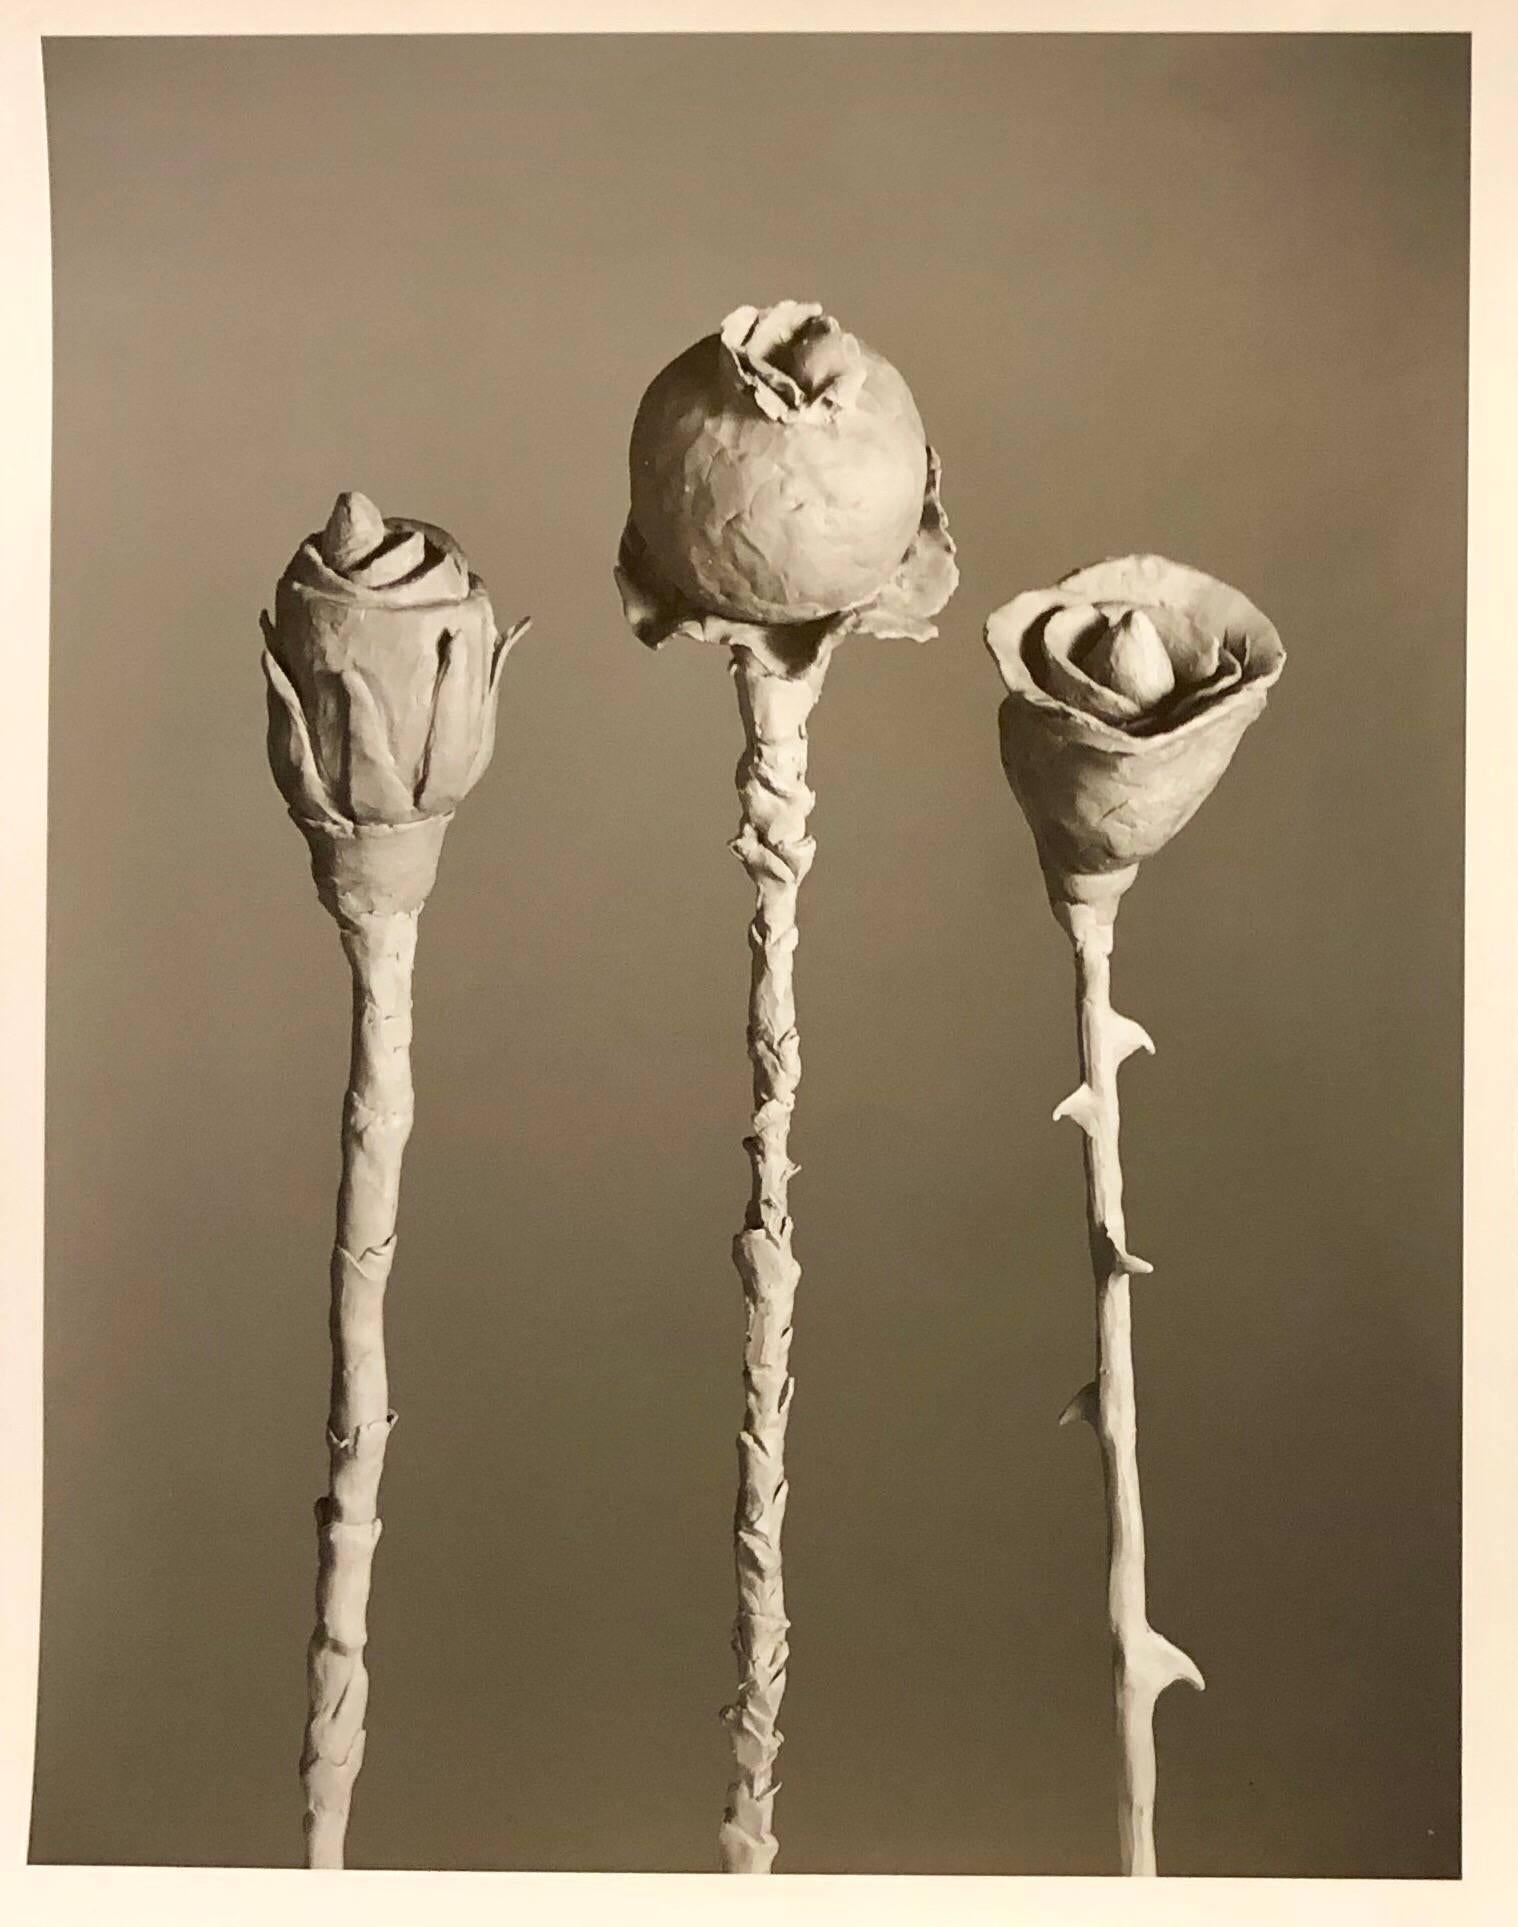 Jo Ann Callis (American, b. 1940) After Blossfeldt, 1988; Gelatin silver print; Signed, dated and numbered A/P 1; 13 5/8